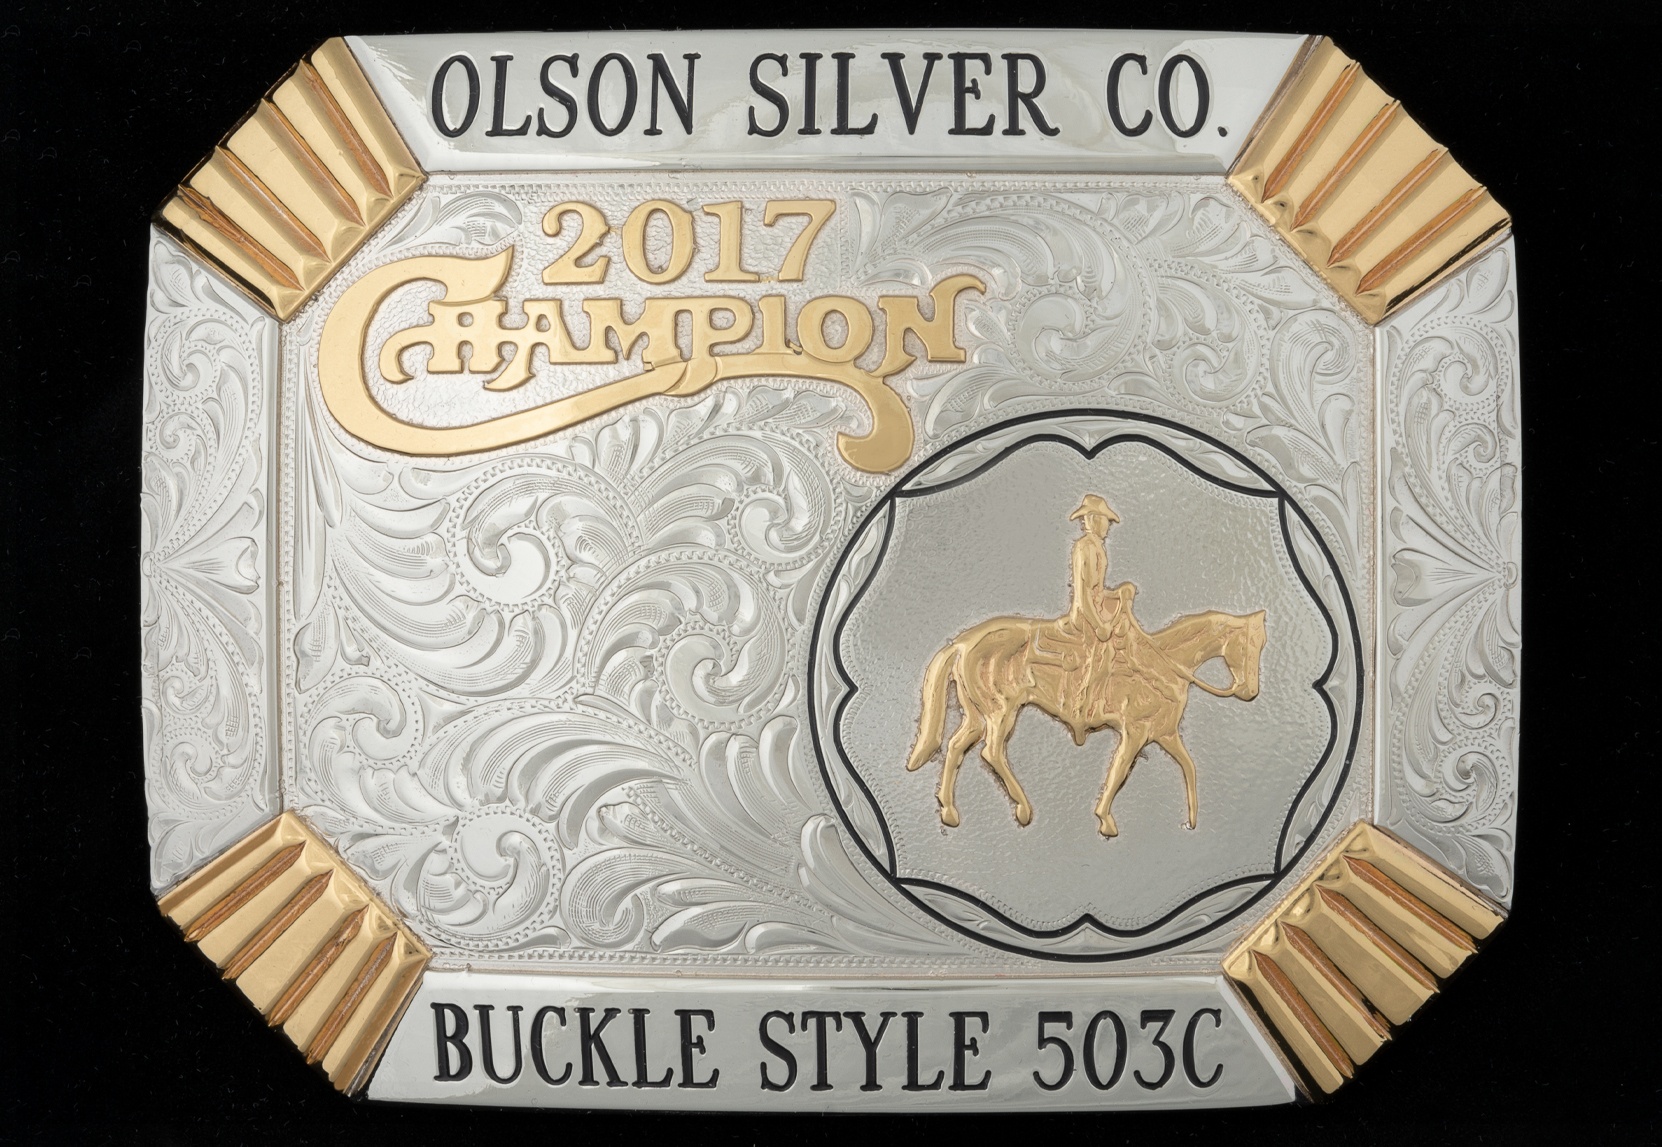 Olson-Silver-after.jpg